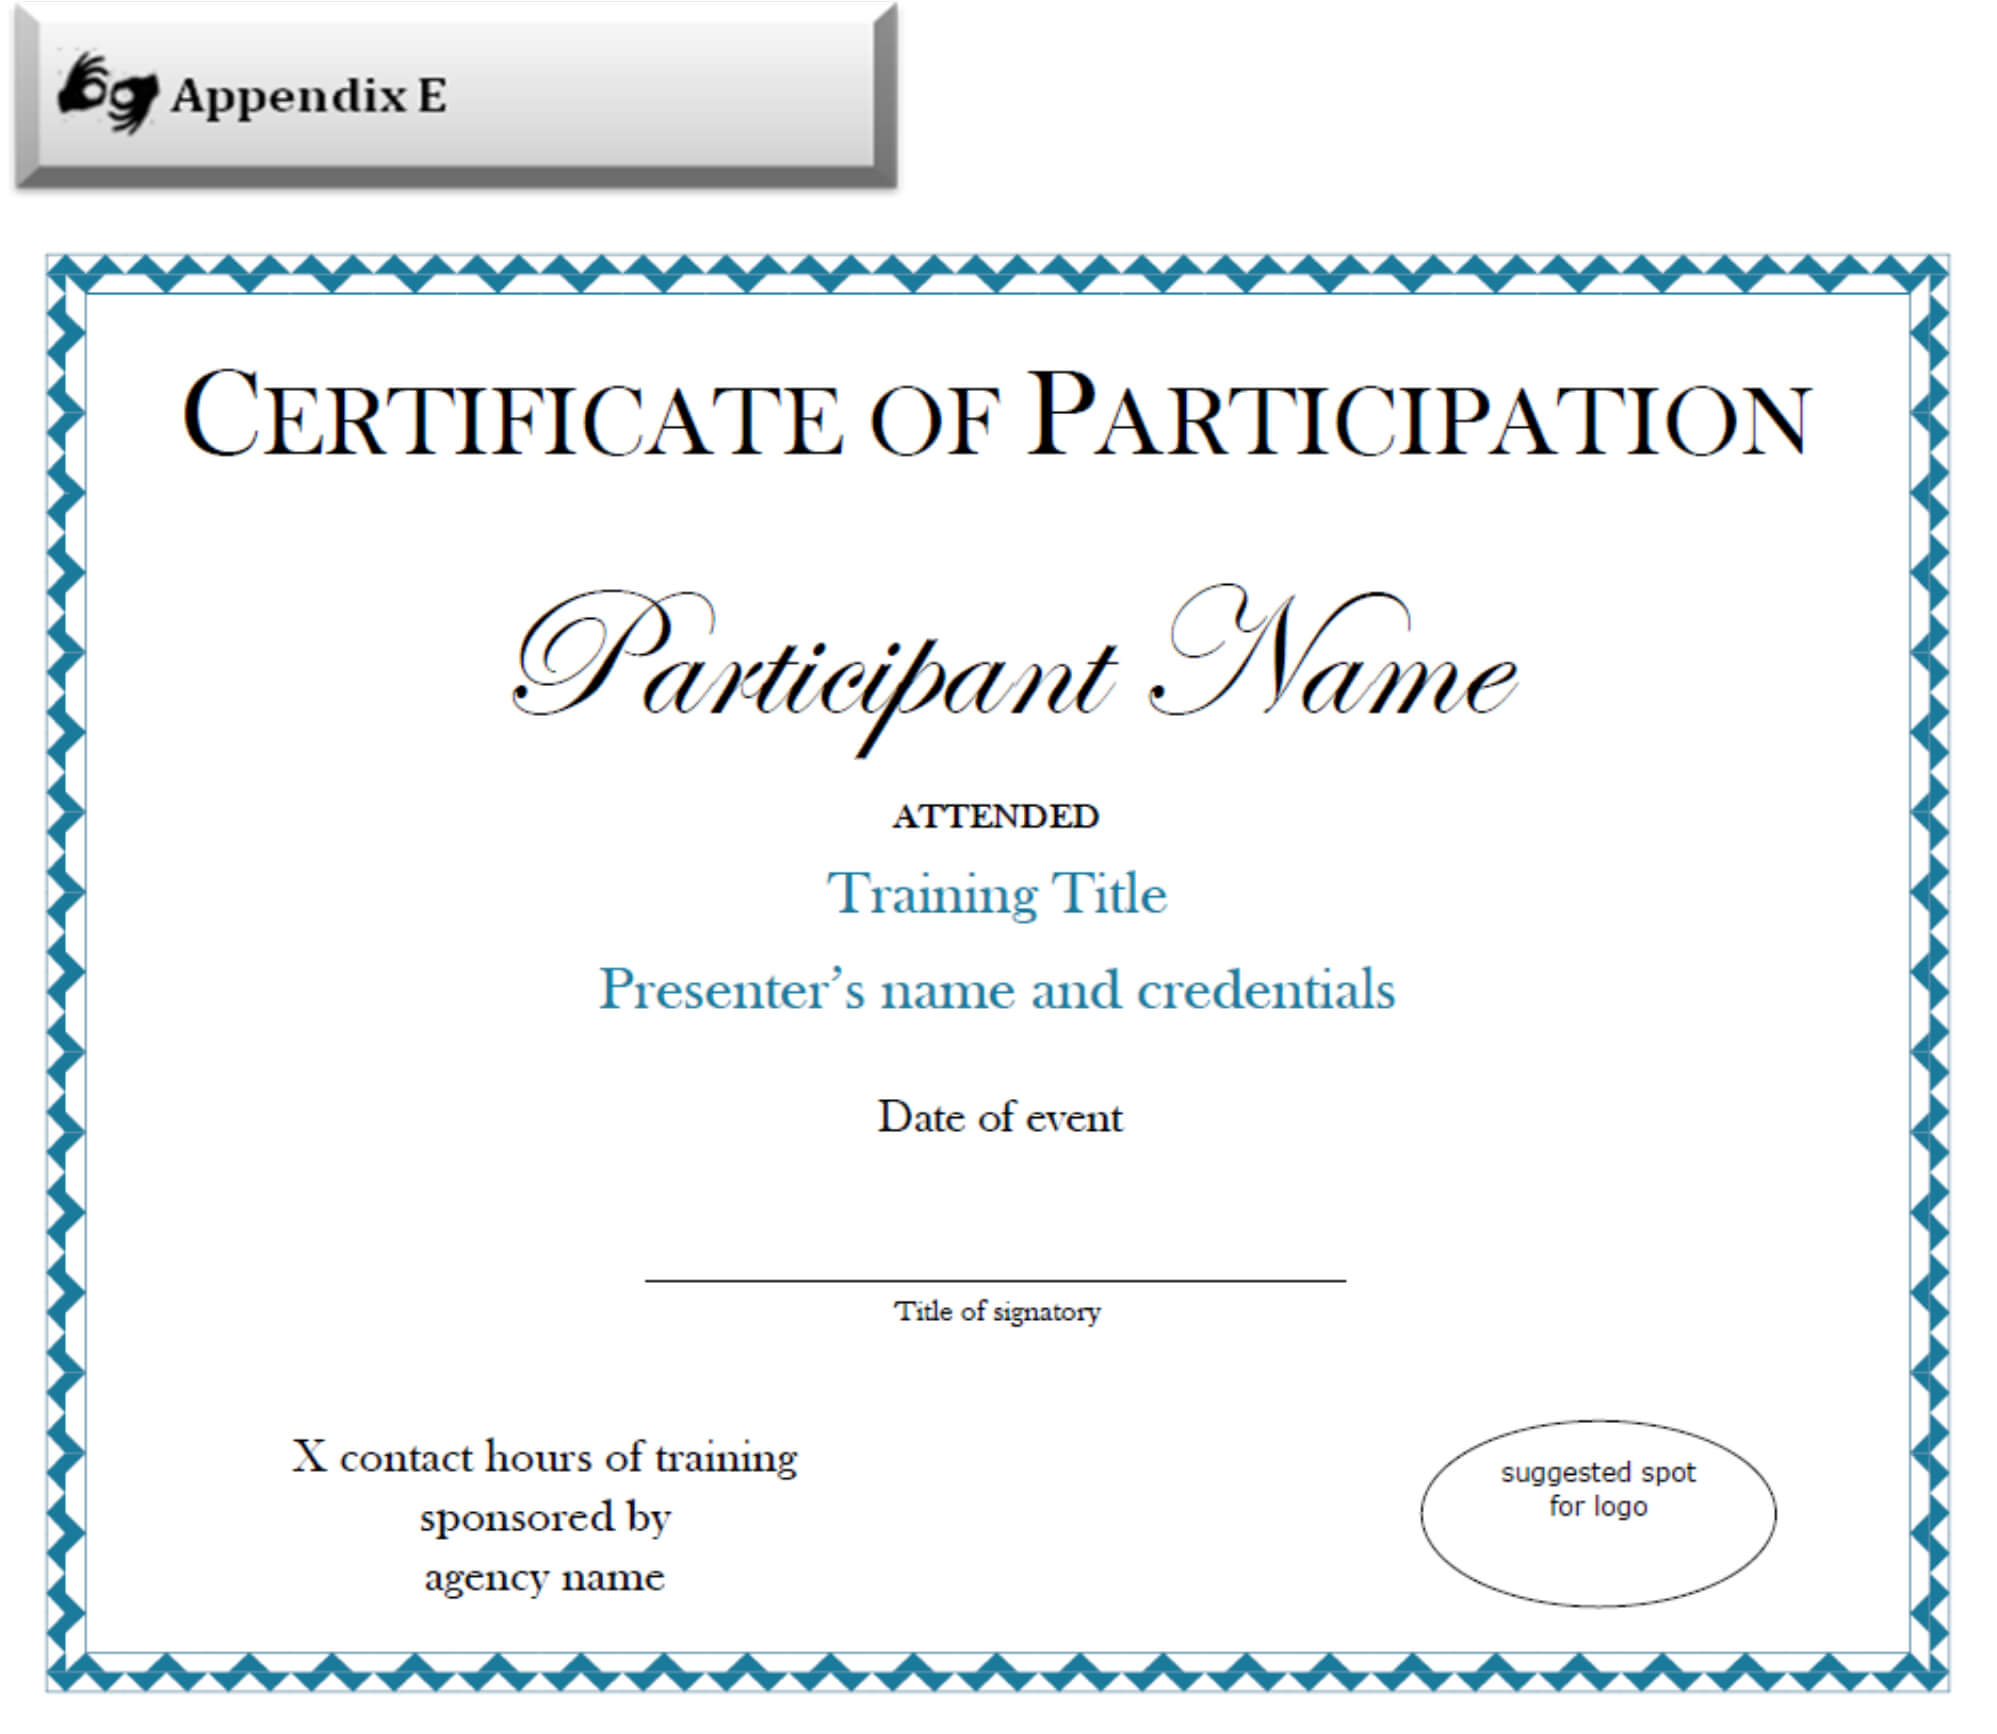 Certificate Of Participation Sample Free Download Inside Certification Of Participation Free Template